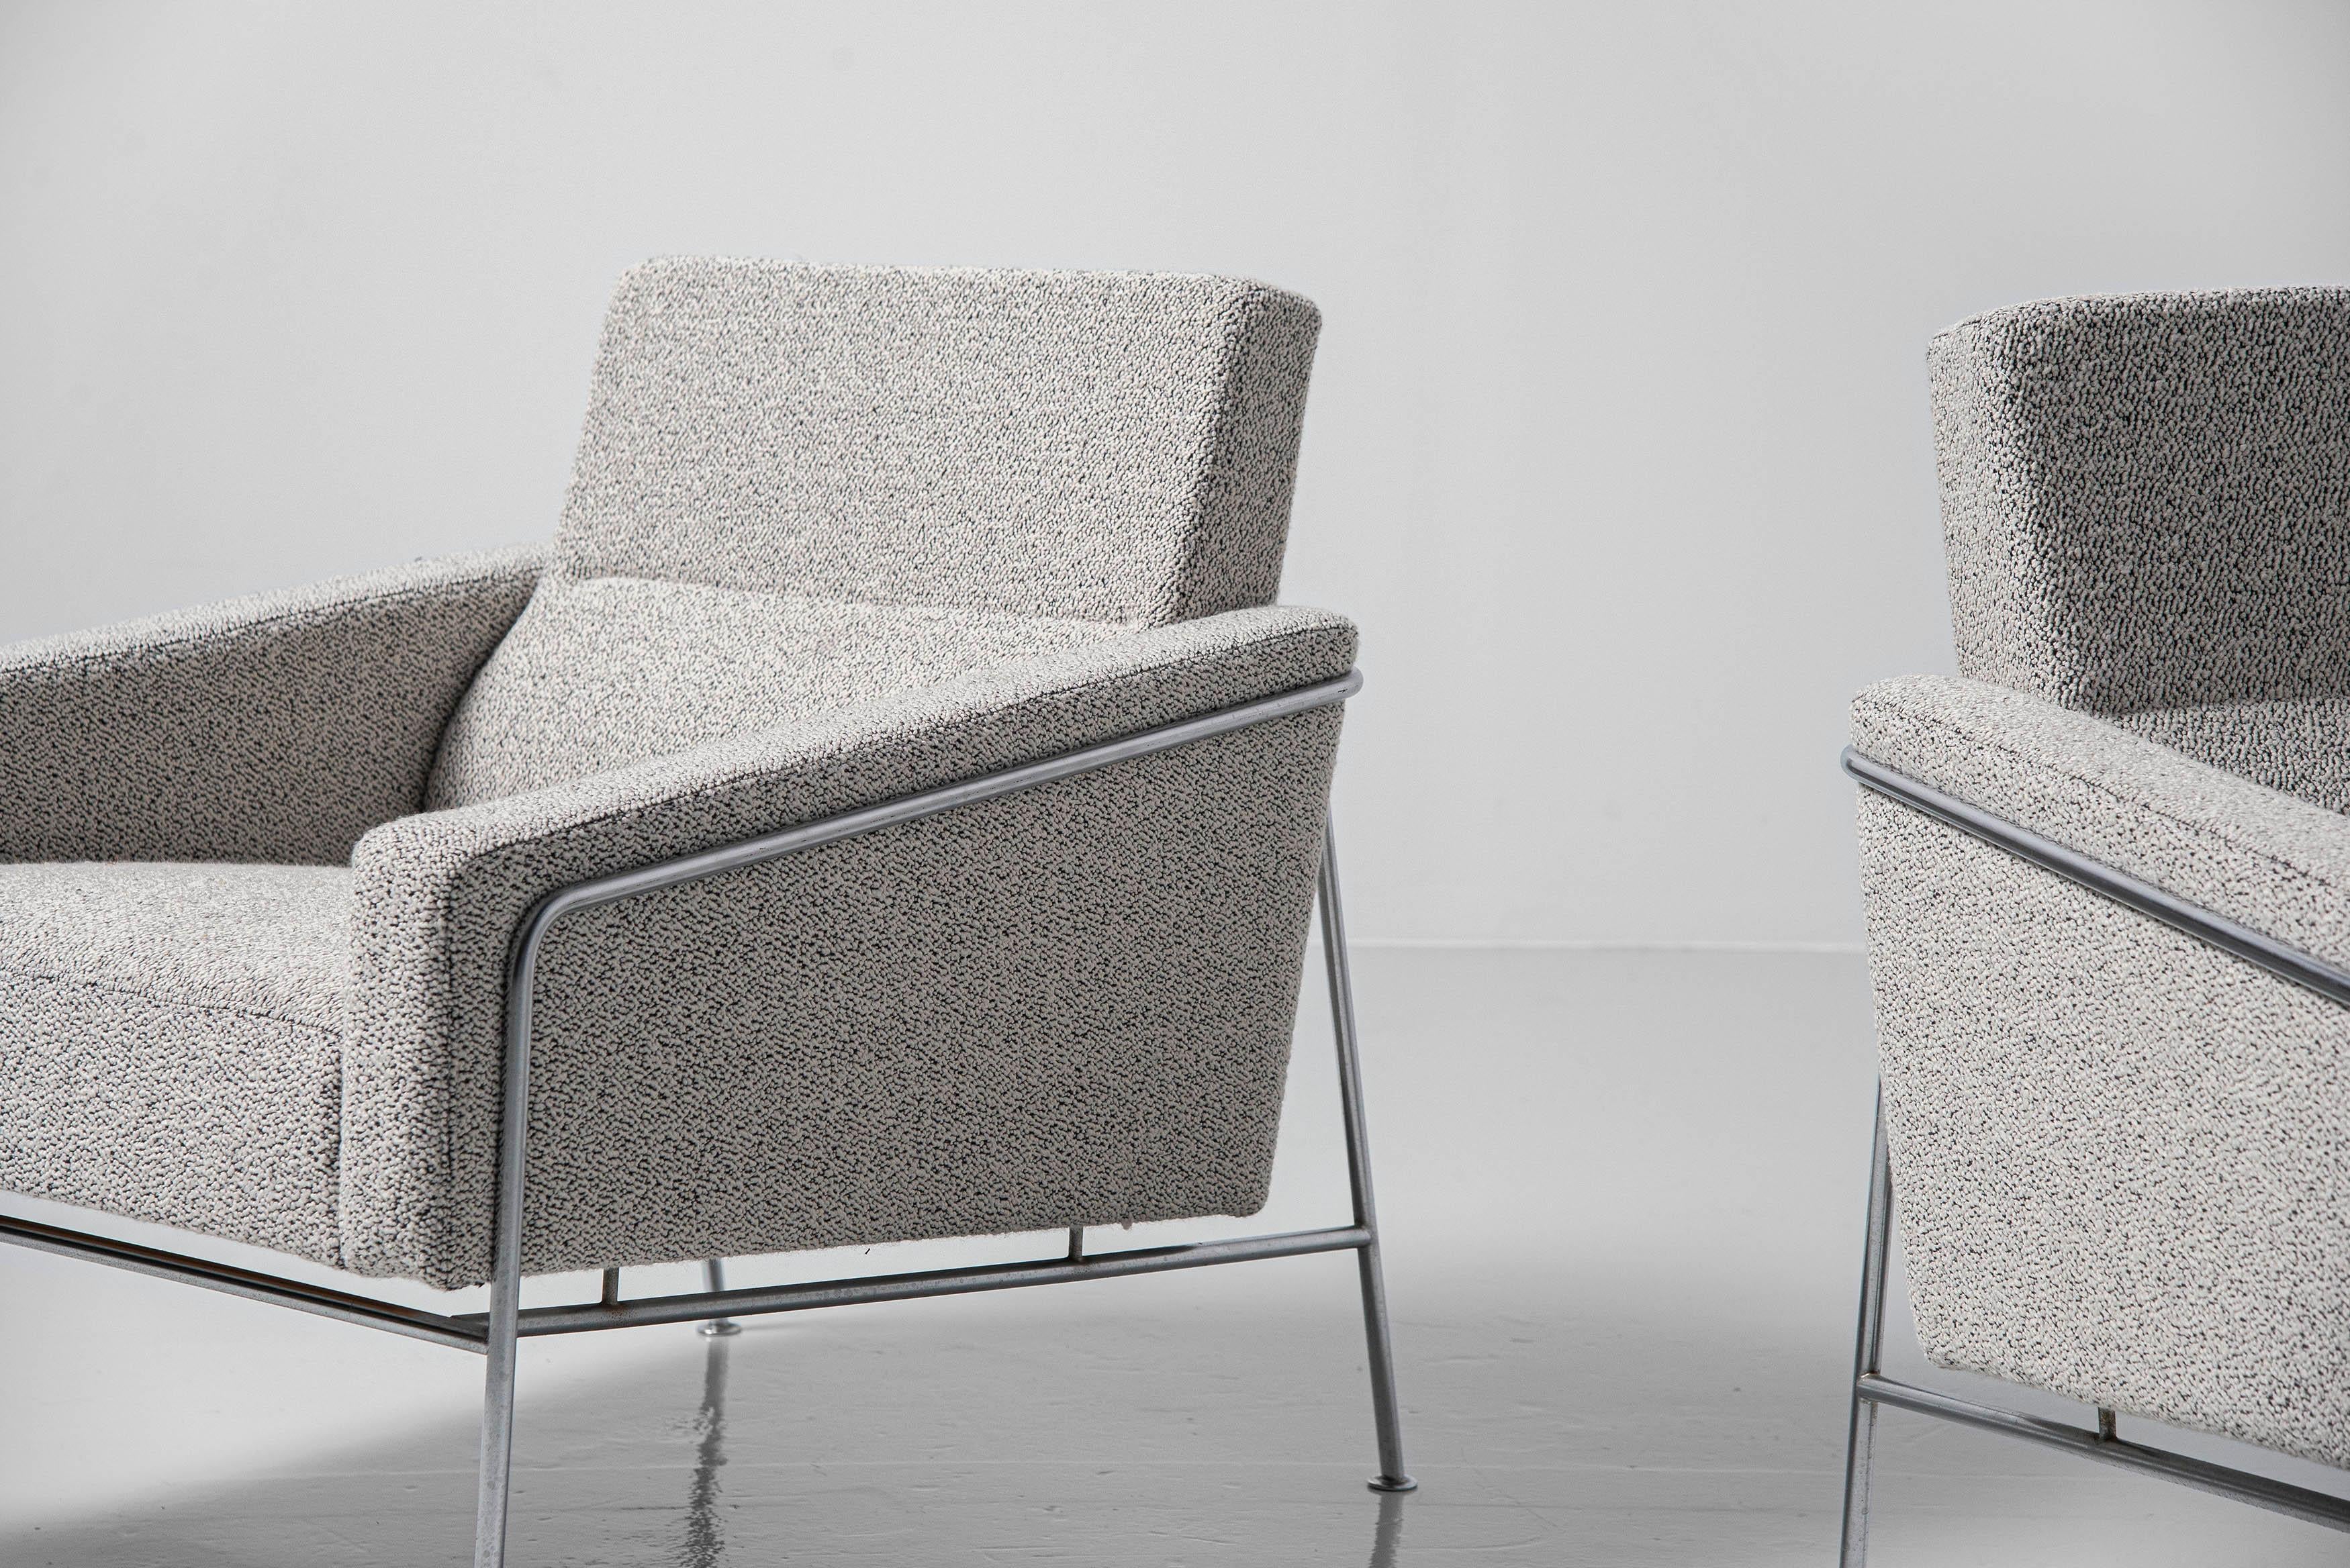 Beautiful set of 2 lounge chairs from the 3300 series designed by Arne Jacobsen and manufactured by Fritz Hansen, Denmark 1956. These chairs were originally designed by Jacobsen for the SAS Air Terminal connected to the SAS Royal Hotel. The series